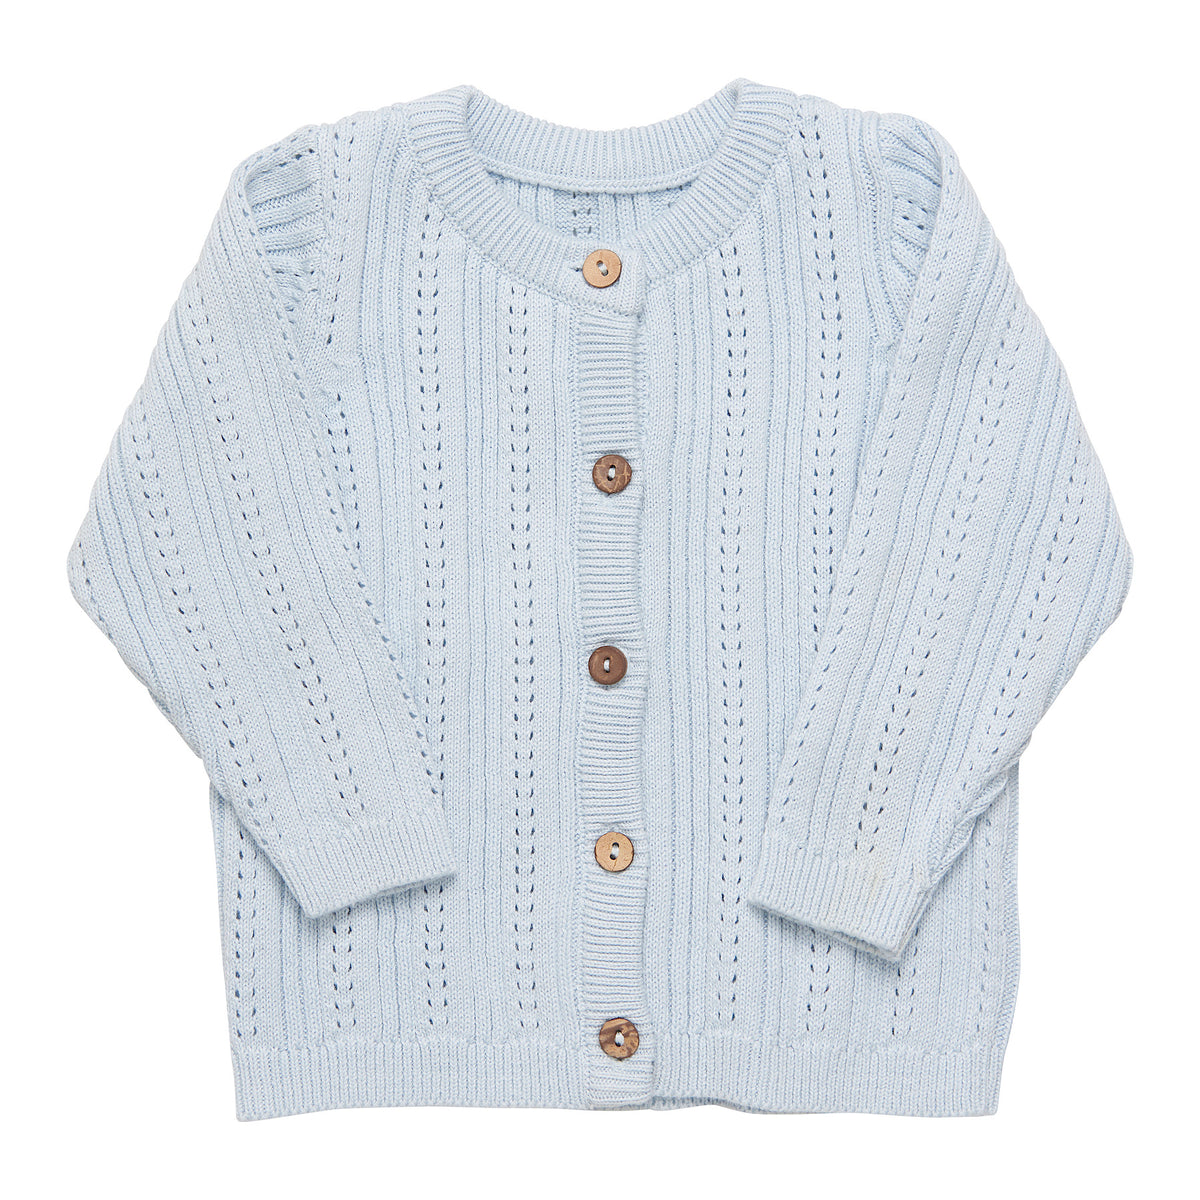 Knit Cardigan with Wooden Button Details, Blue